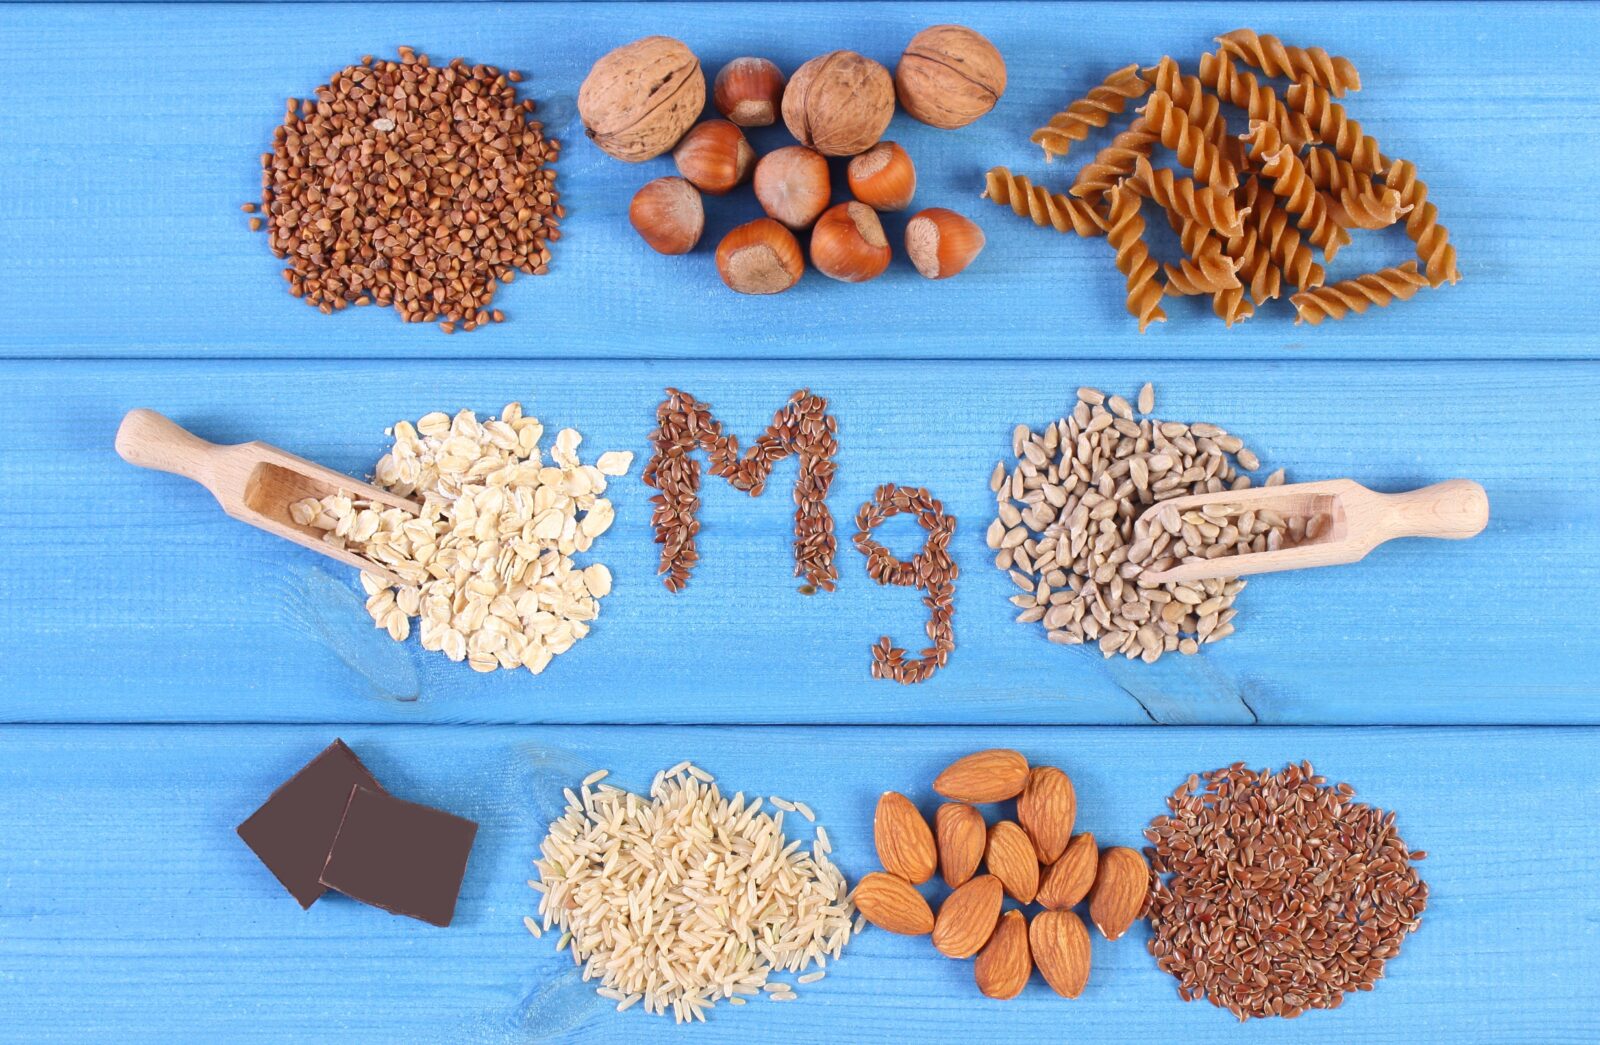 Inscription Mg, ingredients and products containing magnesium and dietary fiber, healthy nutrition, wholemeal pasta, sunflower, buckwheat, oatmeal, brown rice, linseed, hazelnut, almonds, chocolate
